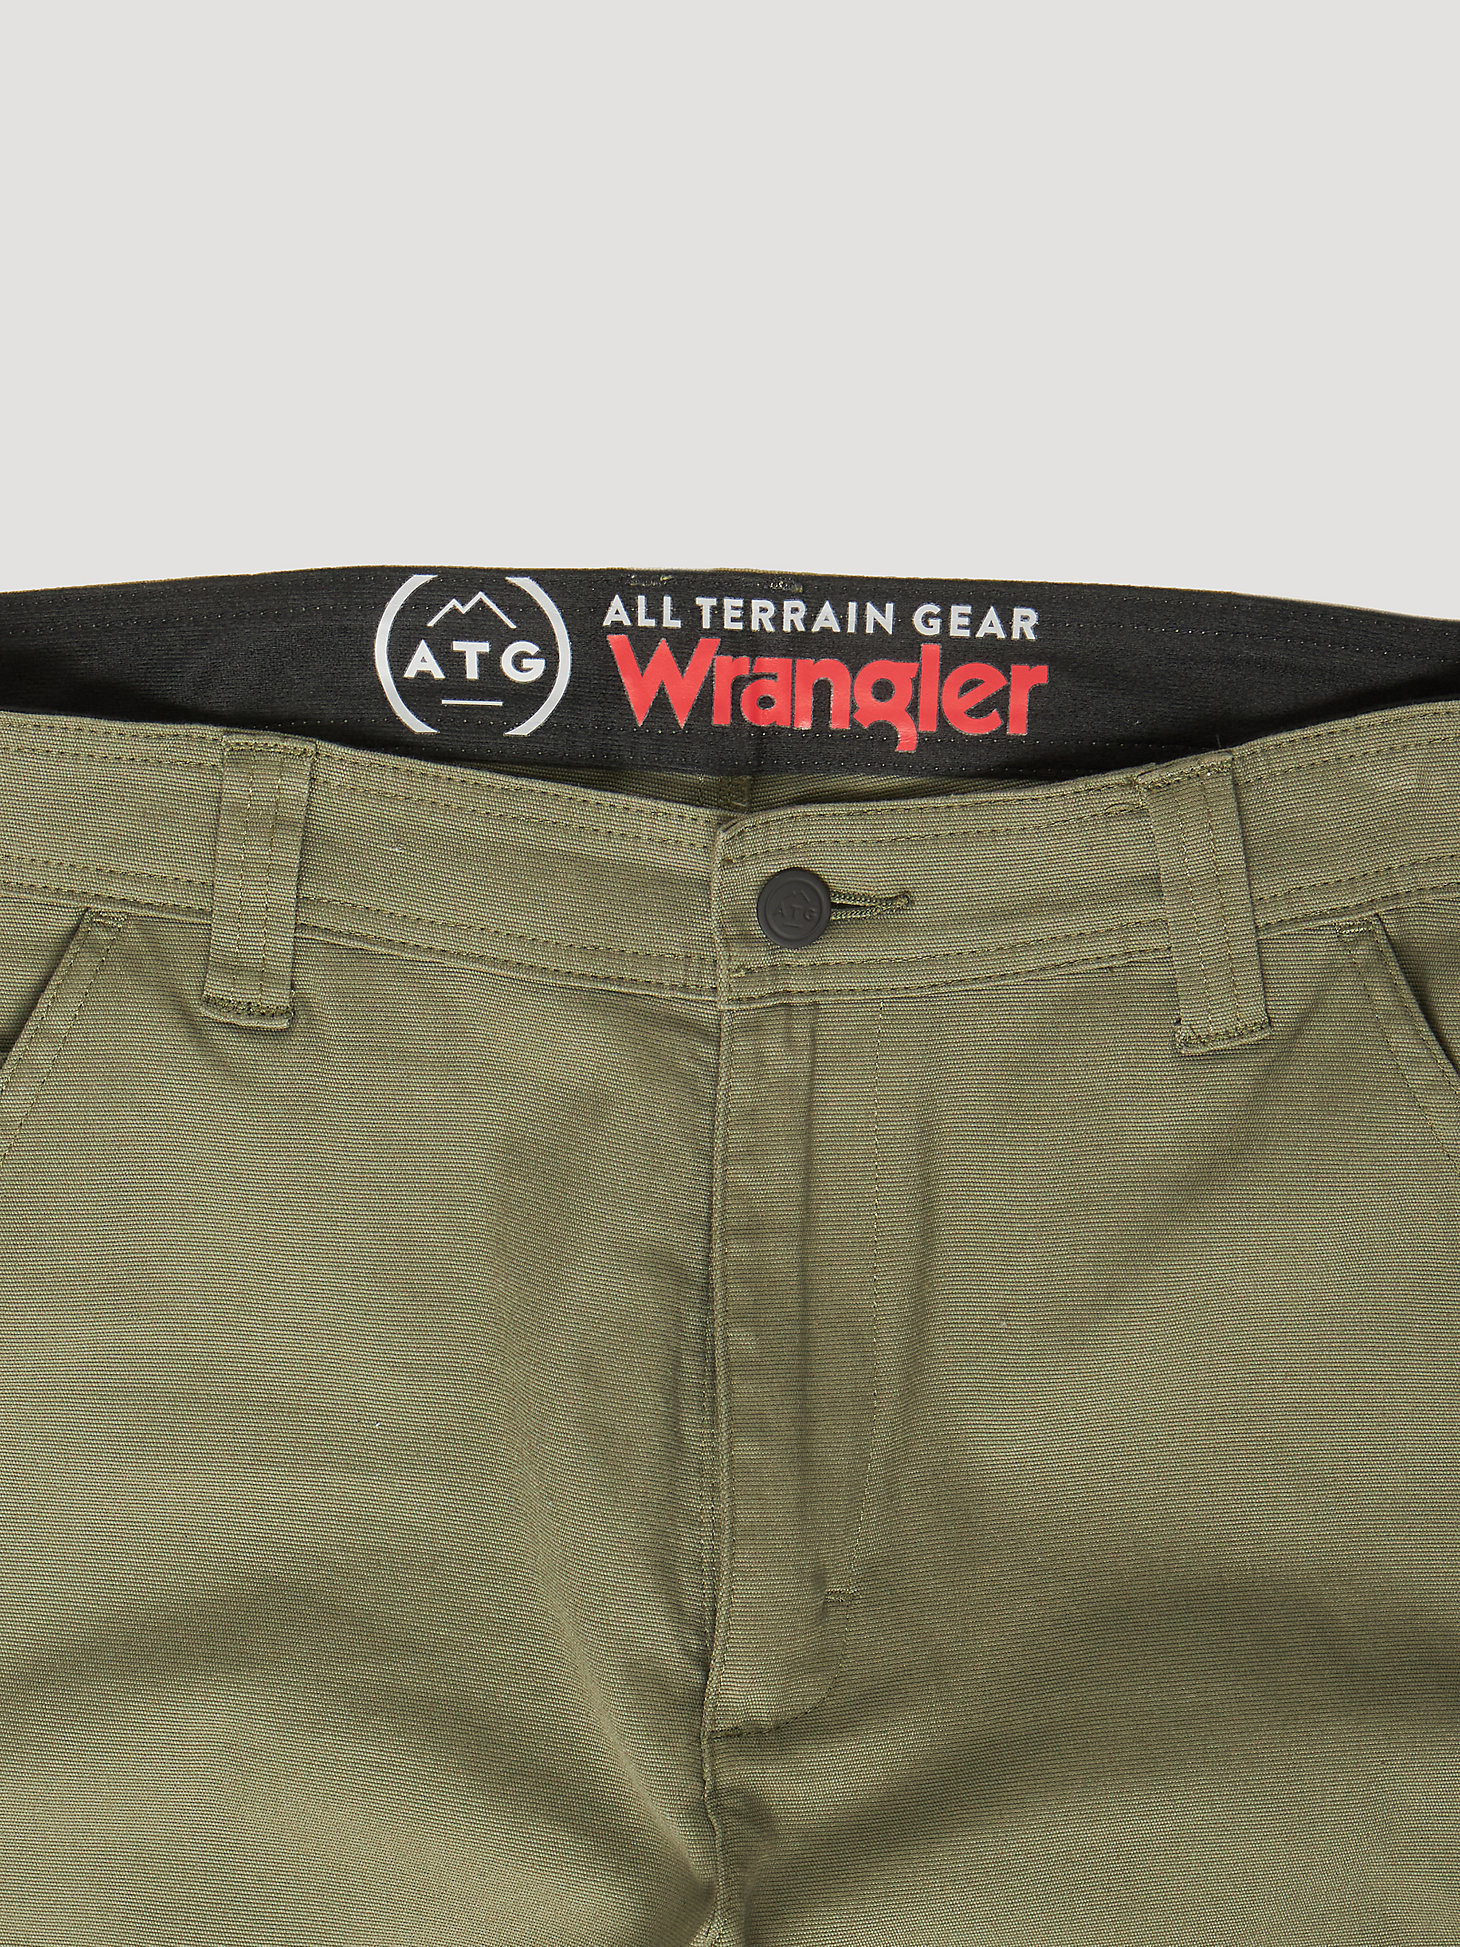 ATG by Wrangler™ Men's Canvas Cargo Pant in Industrial Green alternative view 8